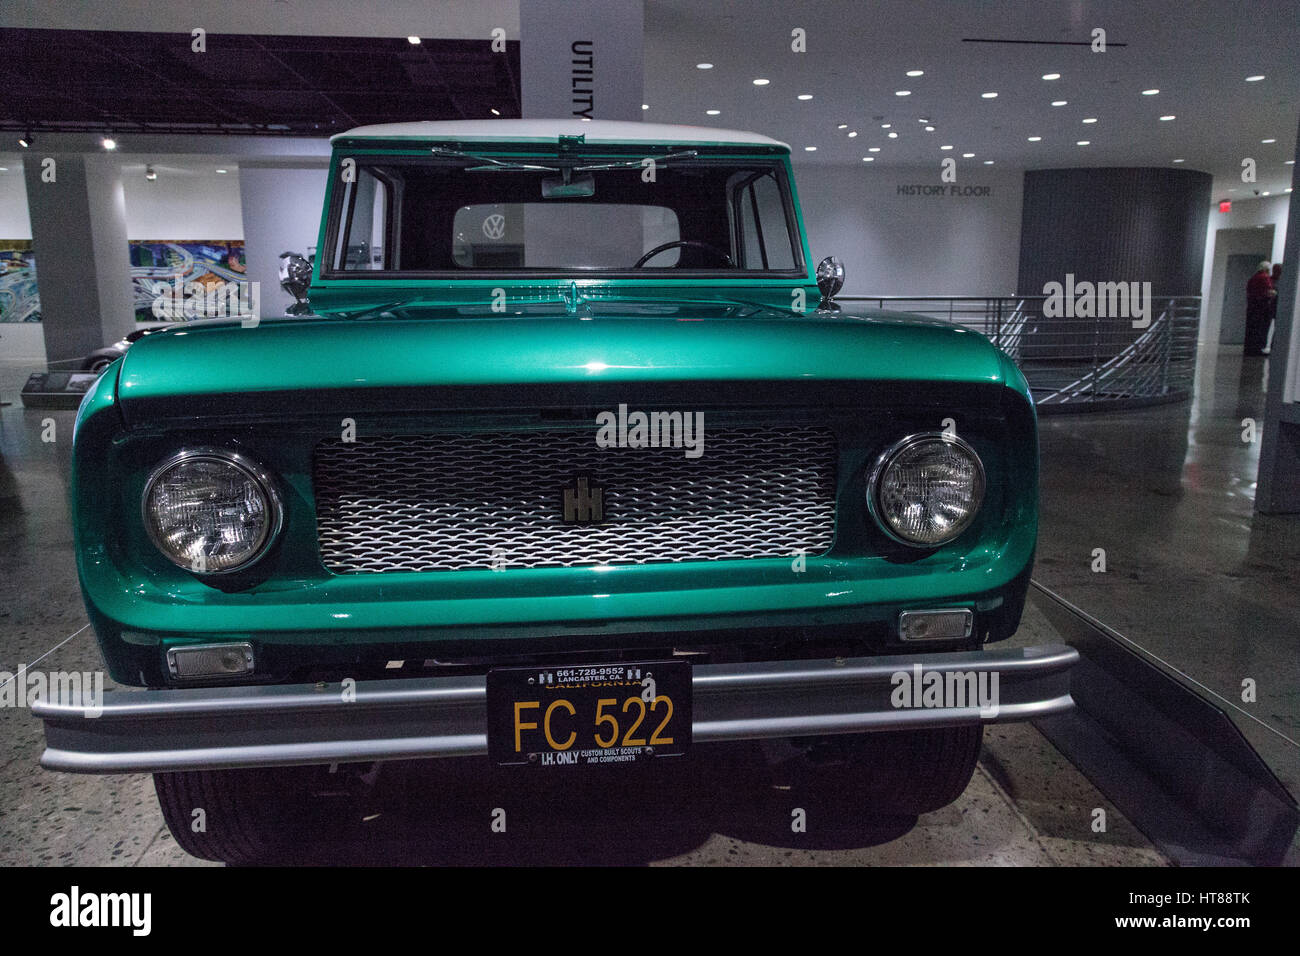 Los Angeles, CA, USA — March 4, 2017: Green 1961 International Scout 80 truck by Harvester at the Petersen Automotive Museum in Los Angeles, Californi Stock Photo